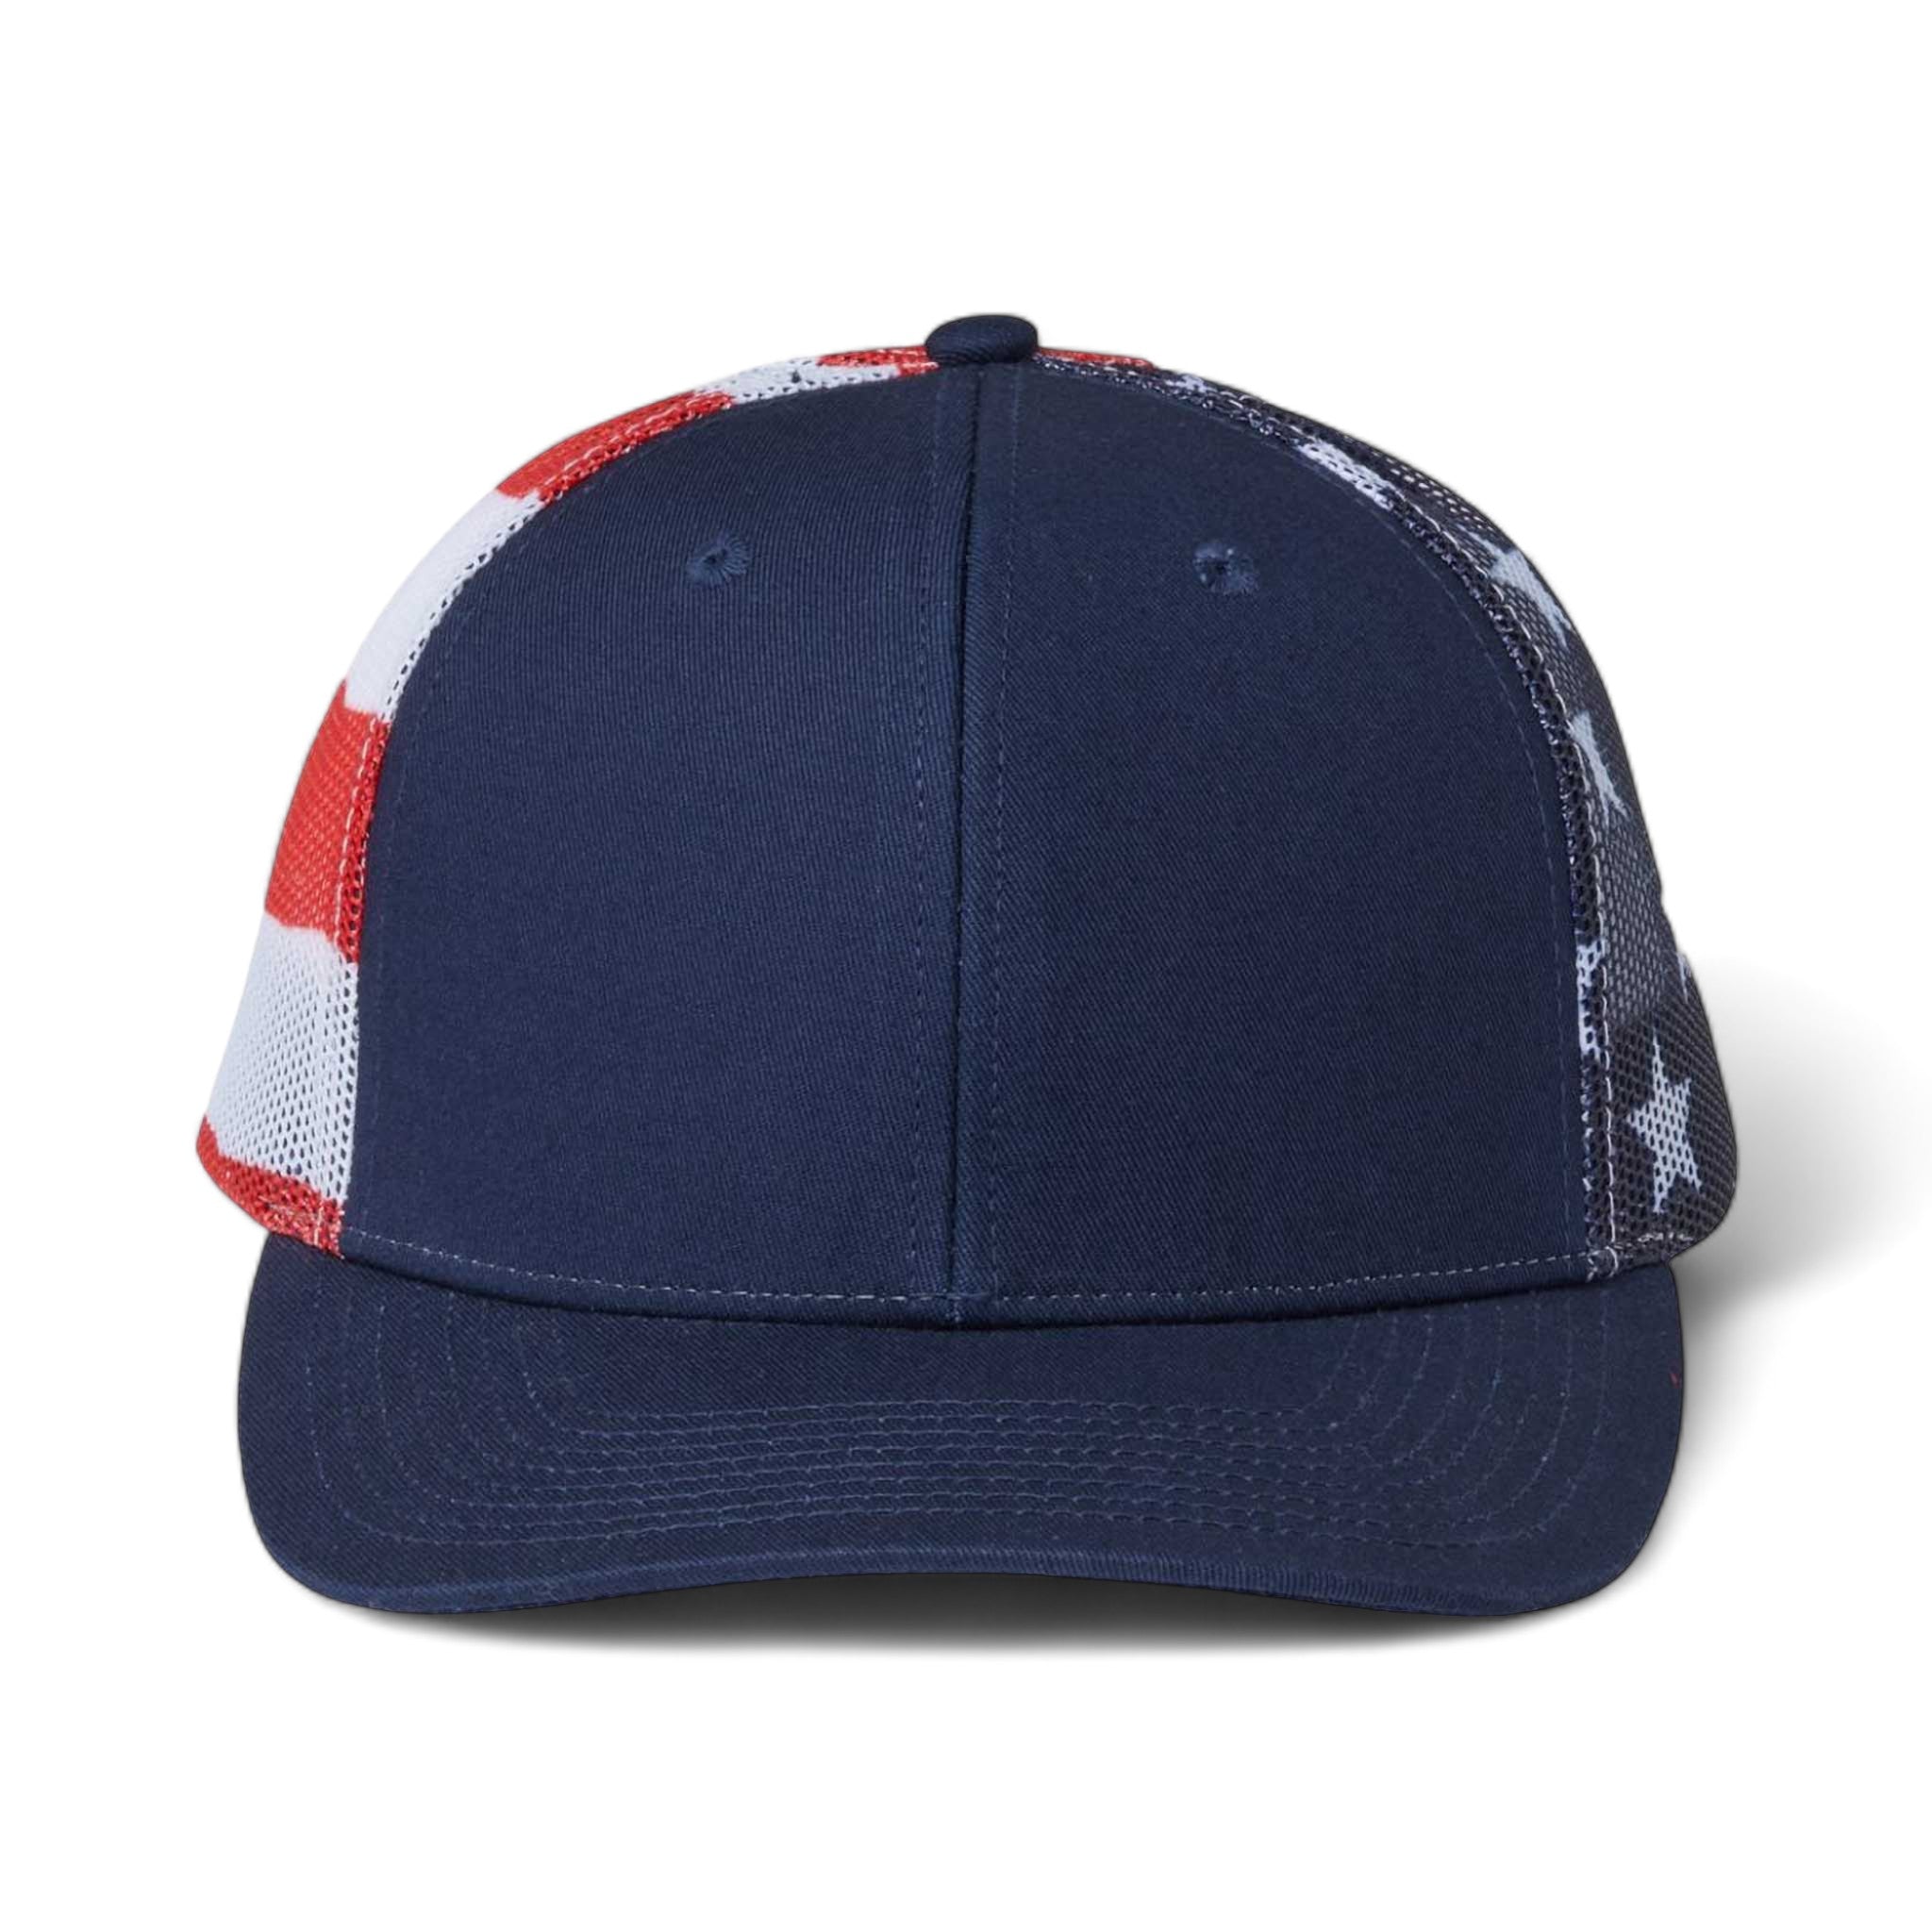 Front view of Kati S700M custom hat in navy and usa flag